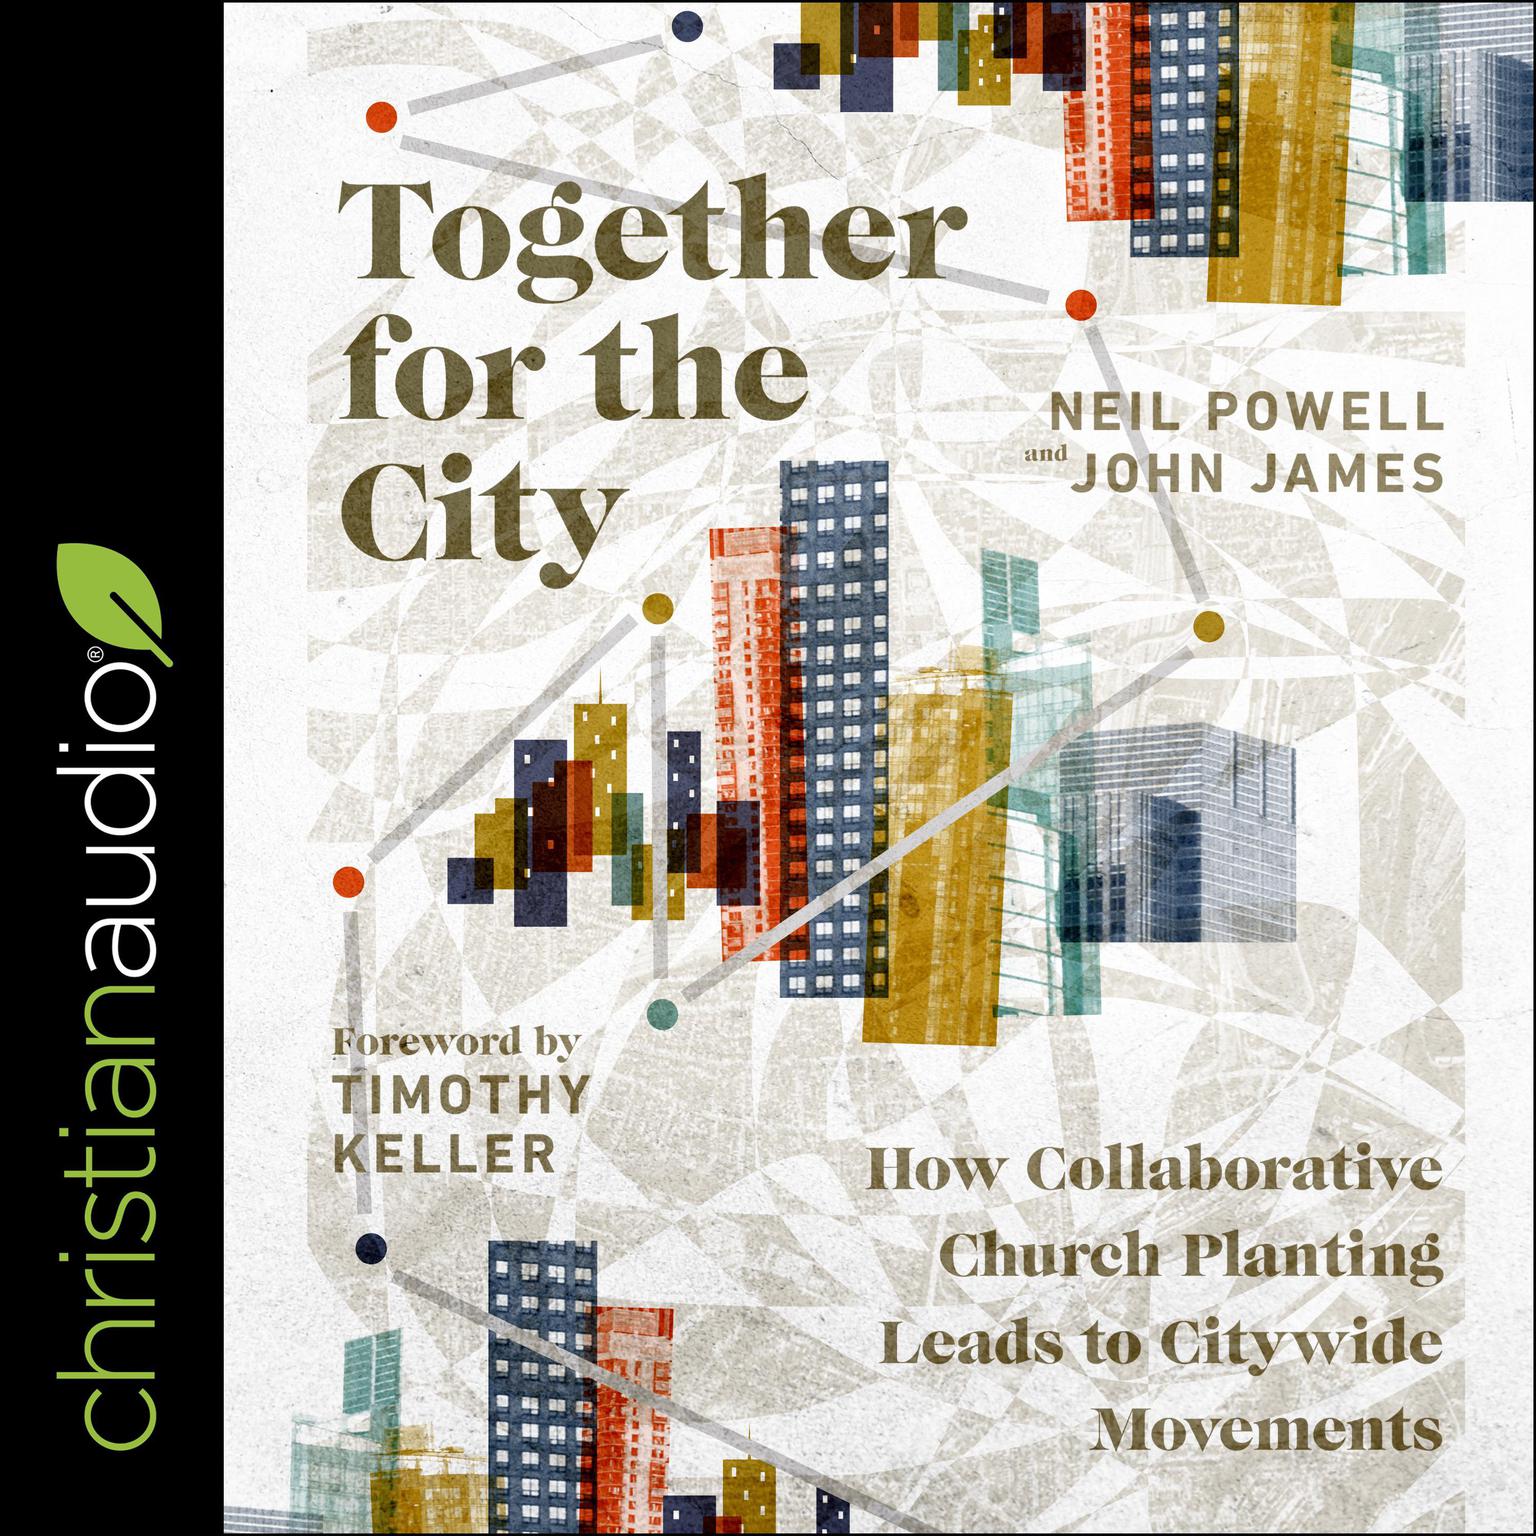 Together for the City: How Collaborative Church Planting Leads to Citywide Movements Audiobook, by Neil Powell